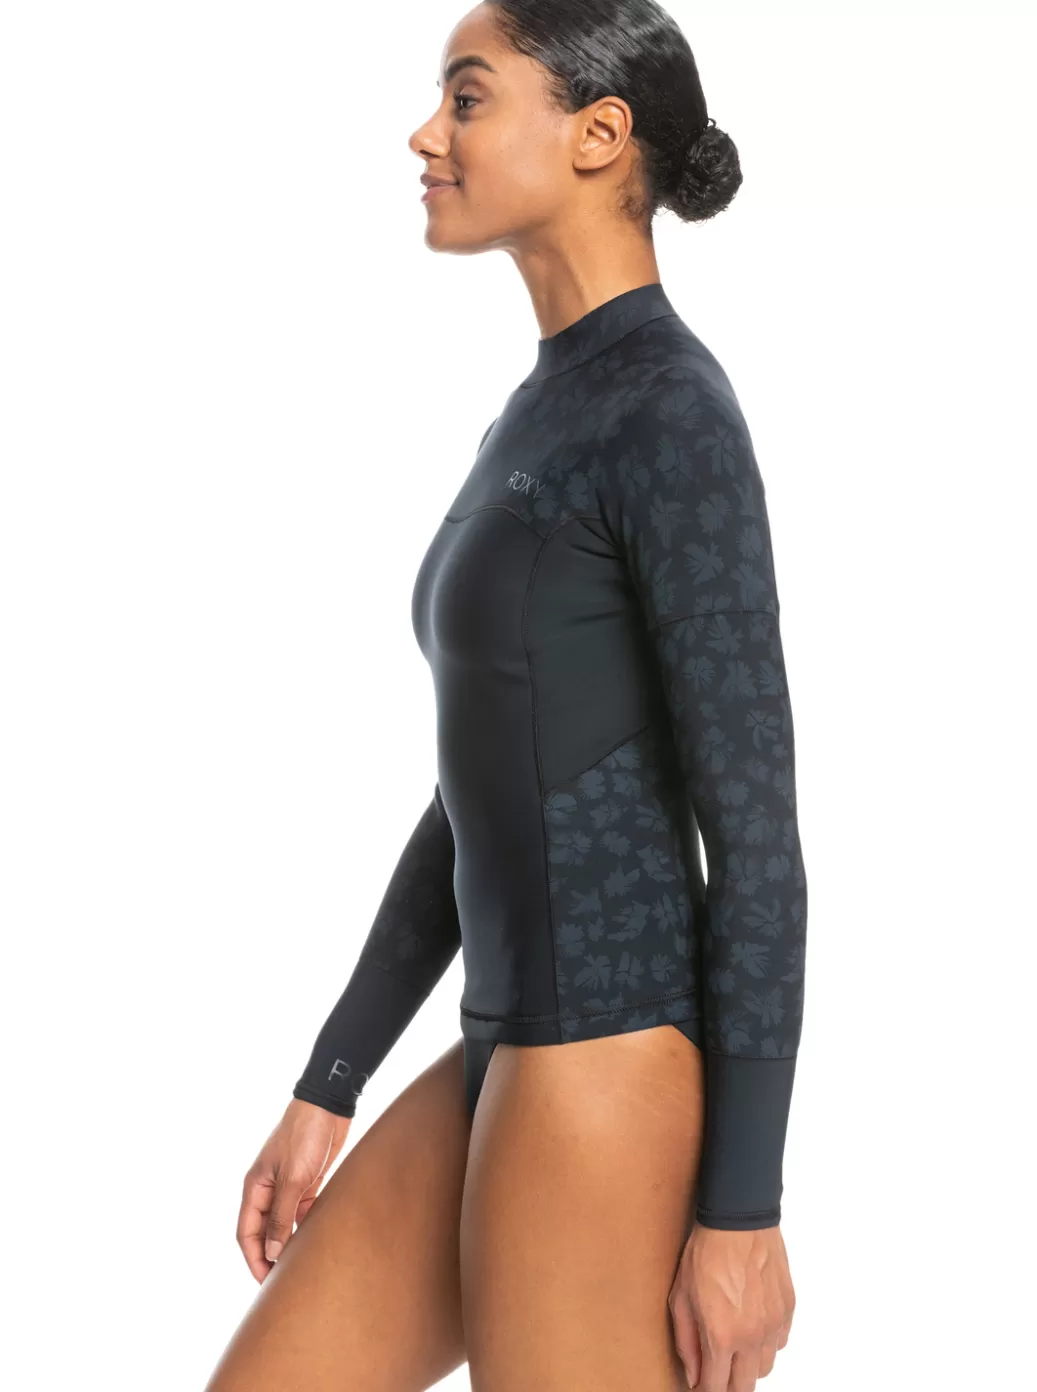 Swell Series | WOMEN ROXY 1mm Swell Series Long Sleeve Wetsuit Top Black